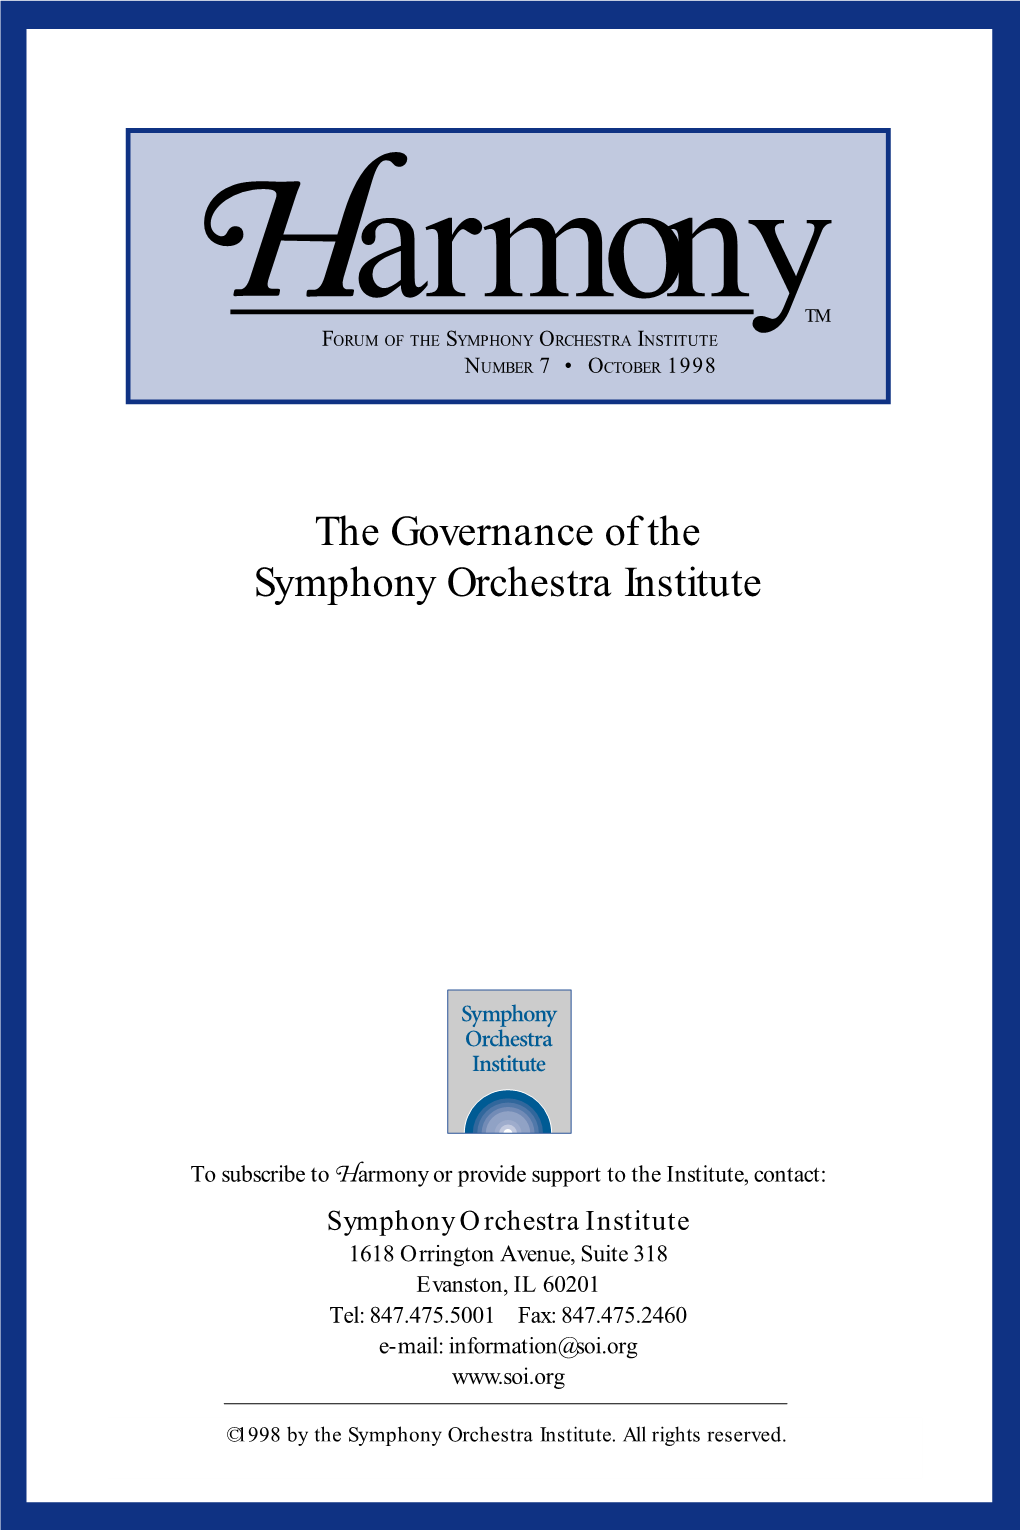 The Governance of the Symphony Orchestra Institute